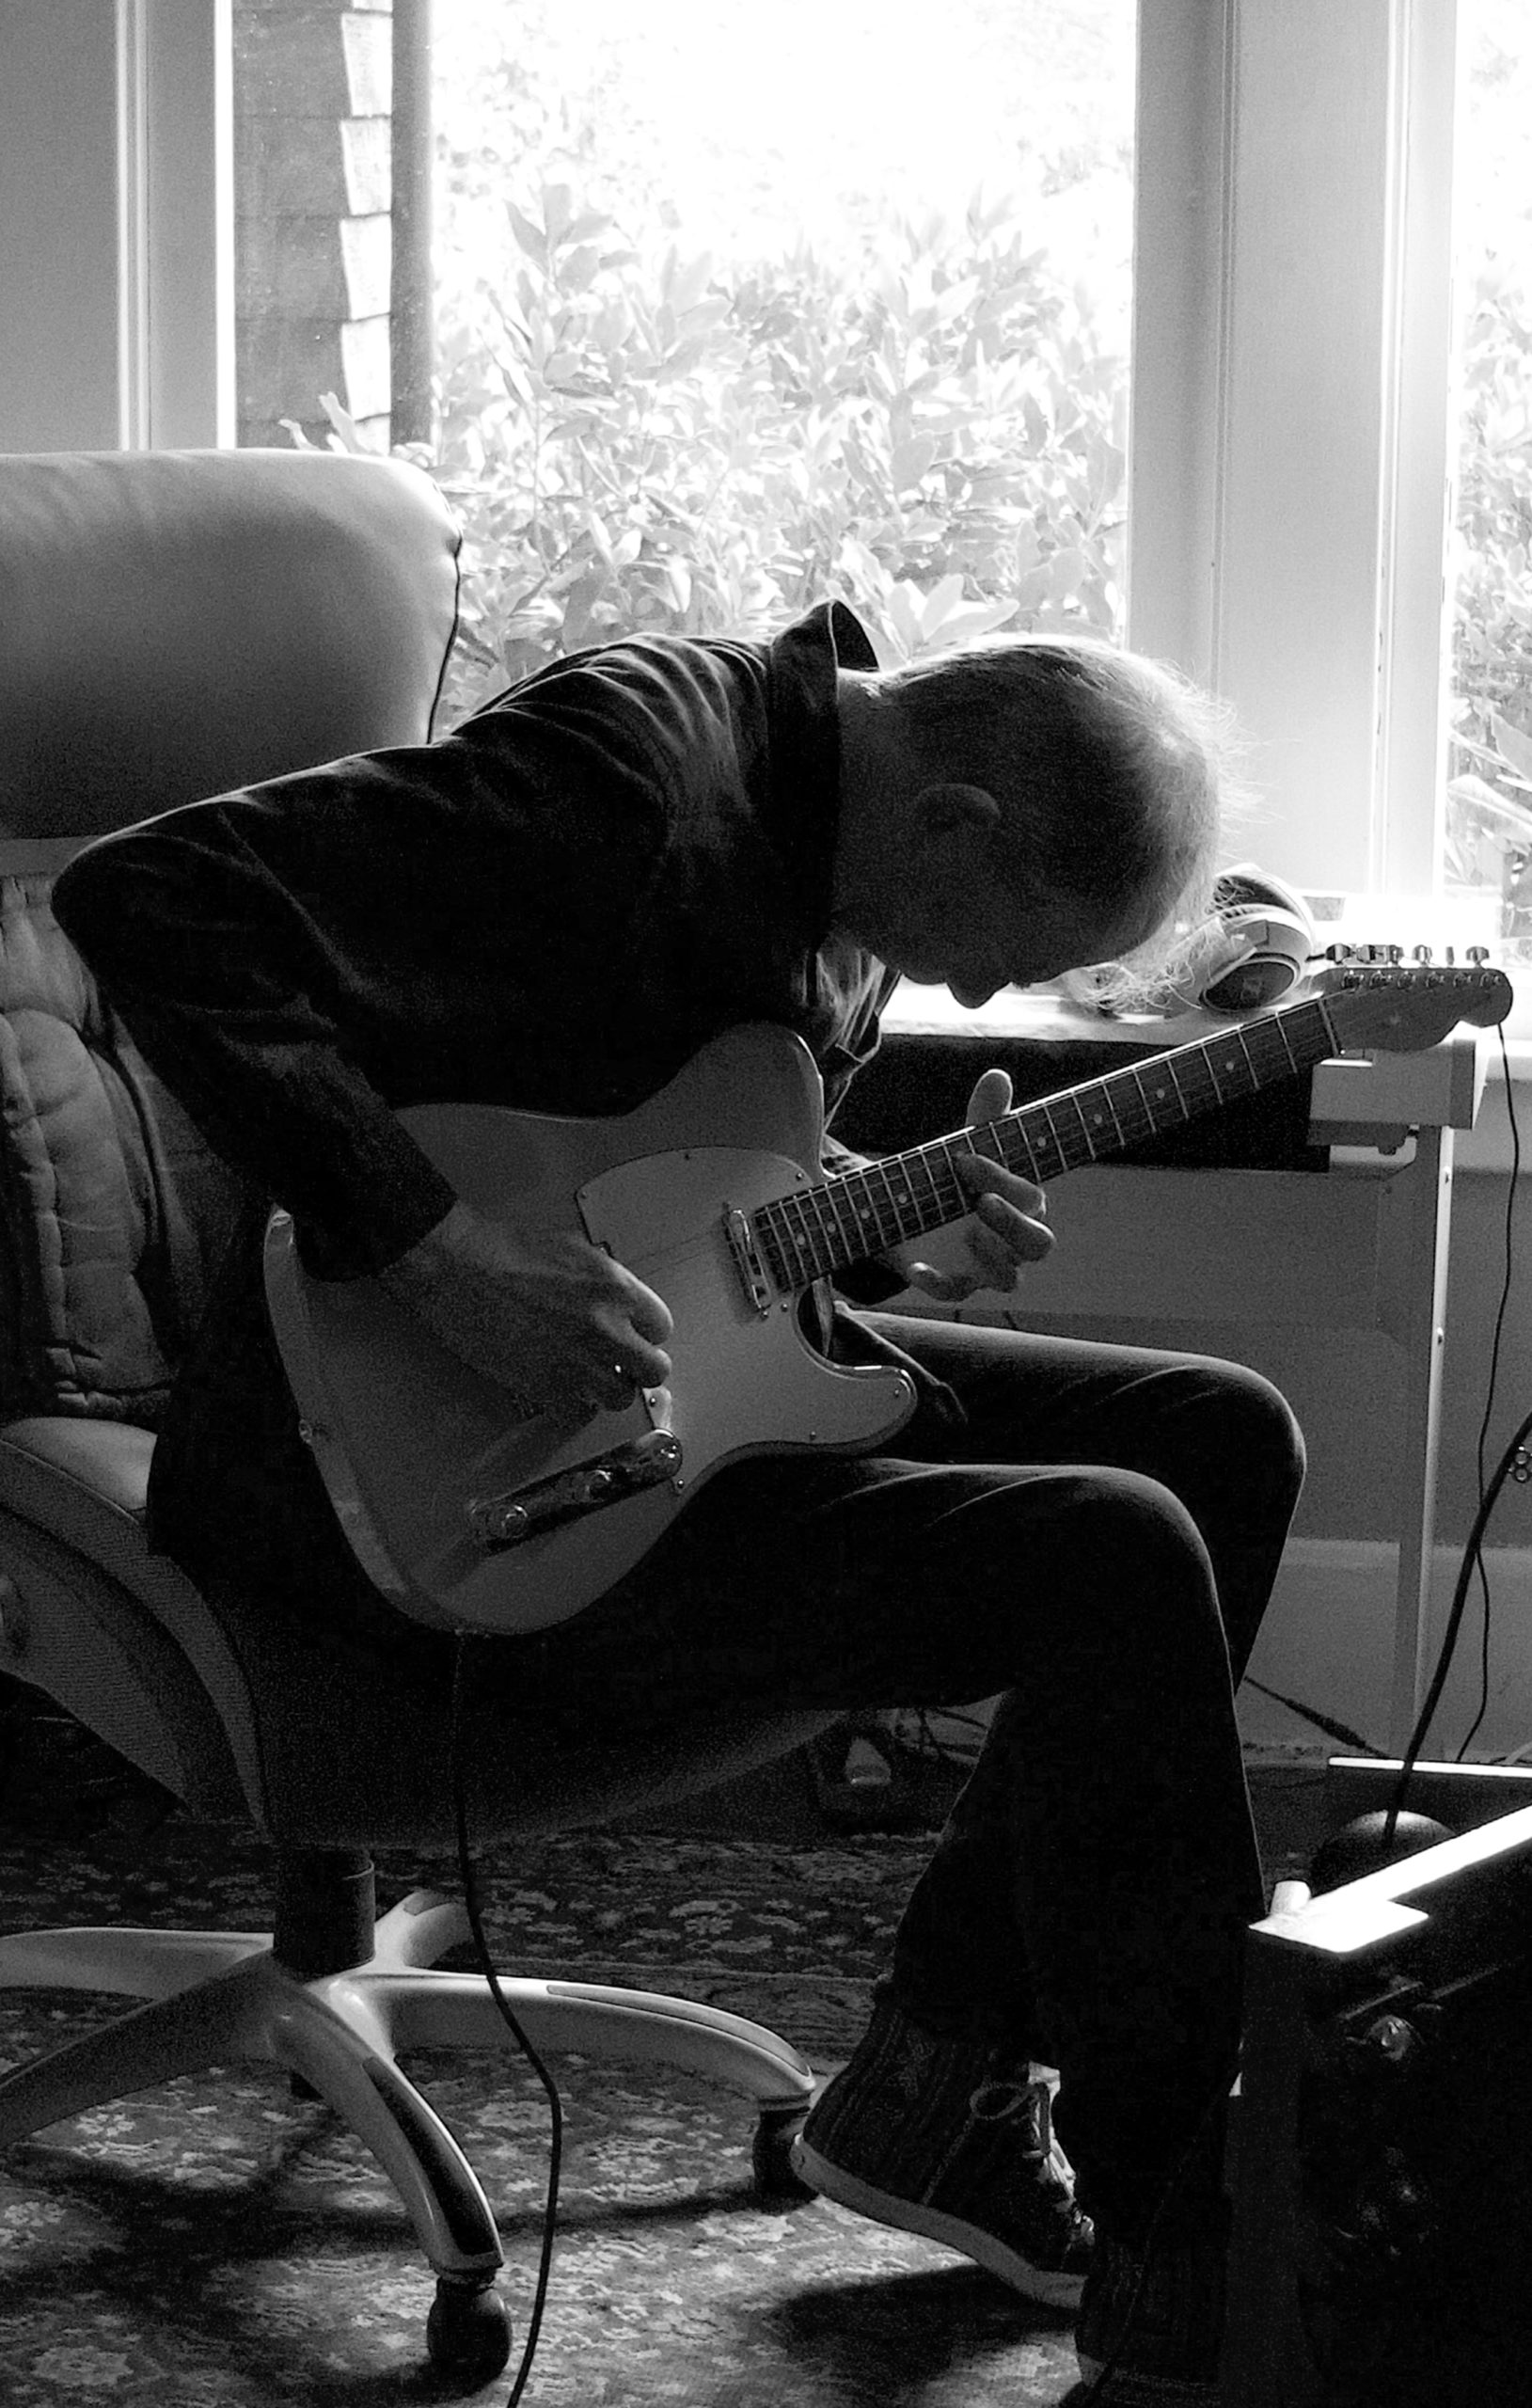 Jeff Kelly recording in his home